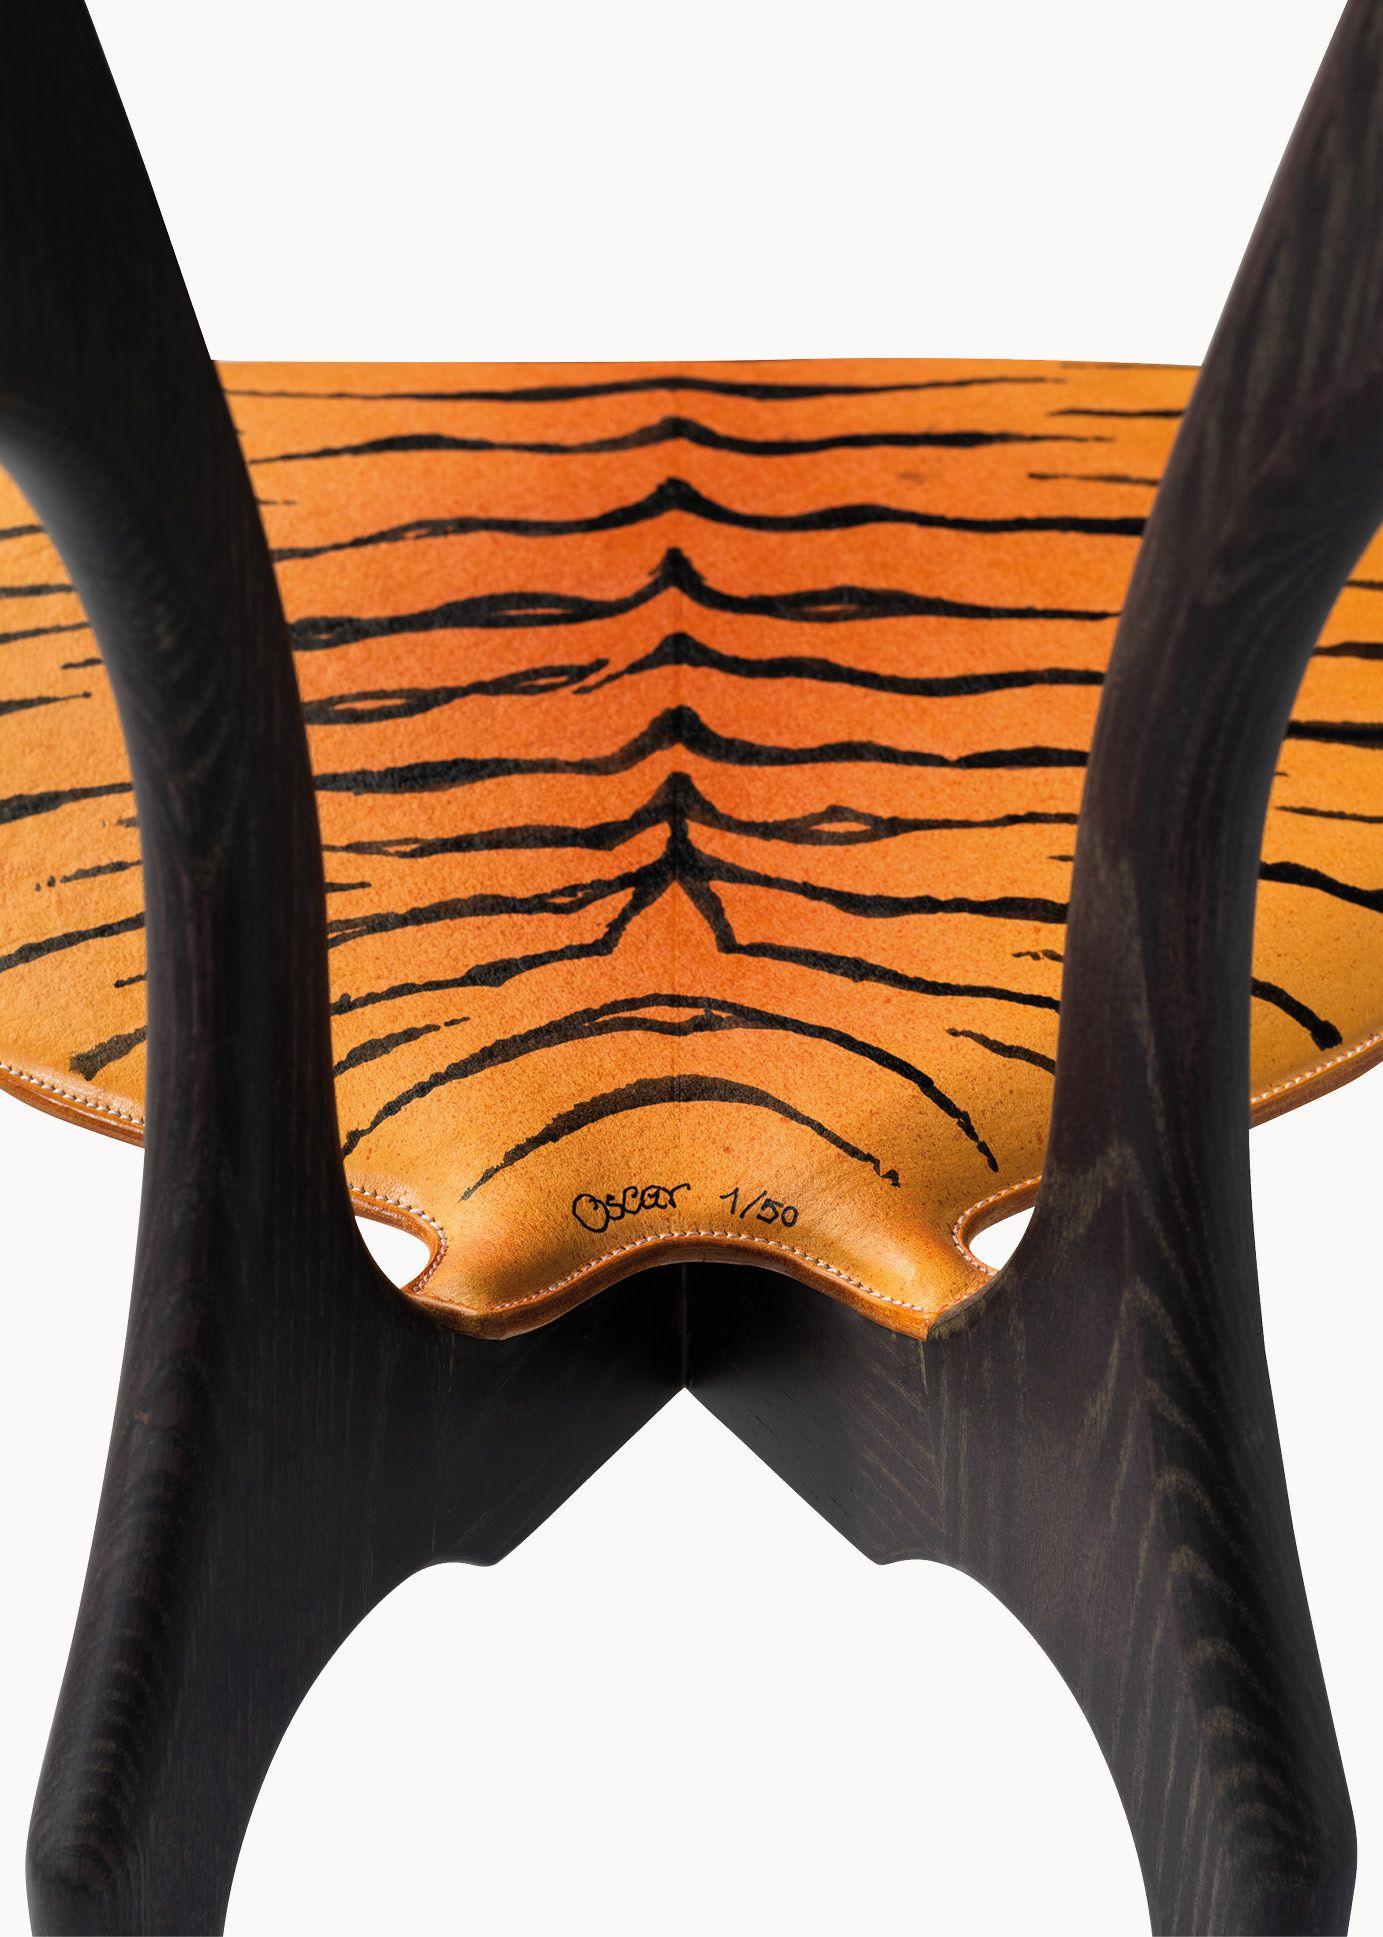 Spanish Tiger Art Gaulino Limited Edition Armchair by Oscar Tusquets For Sale